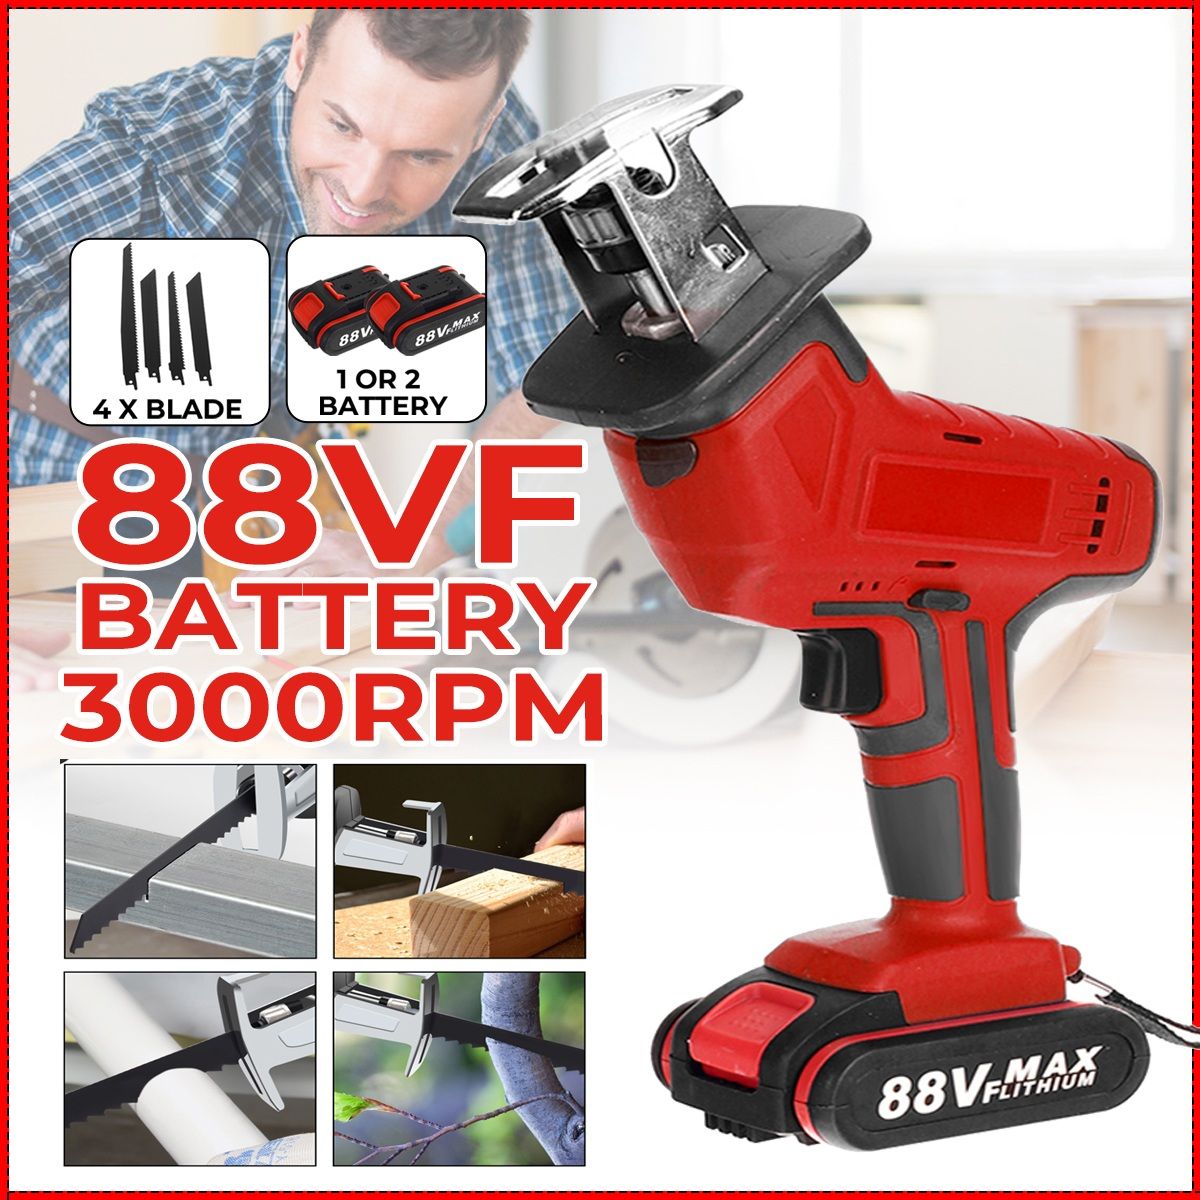 88VF-Electric-Reciprocating-Saw-Wireless-Rechargeable-Saw-Wood-Metal-Plastic-Sawing-Cutting-Tool-1765141